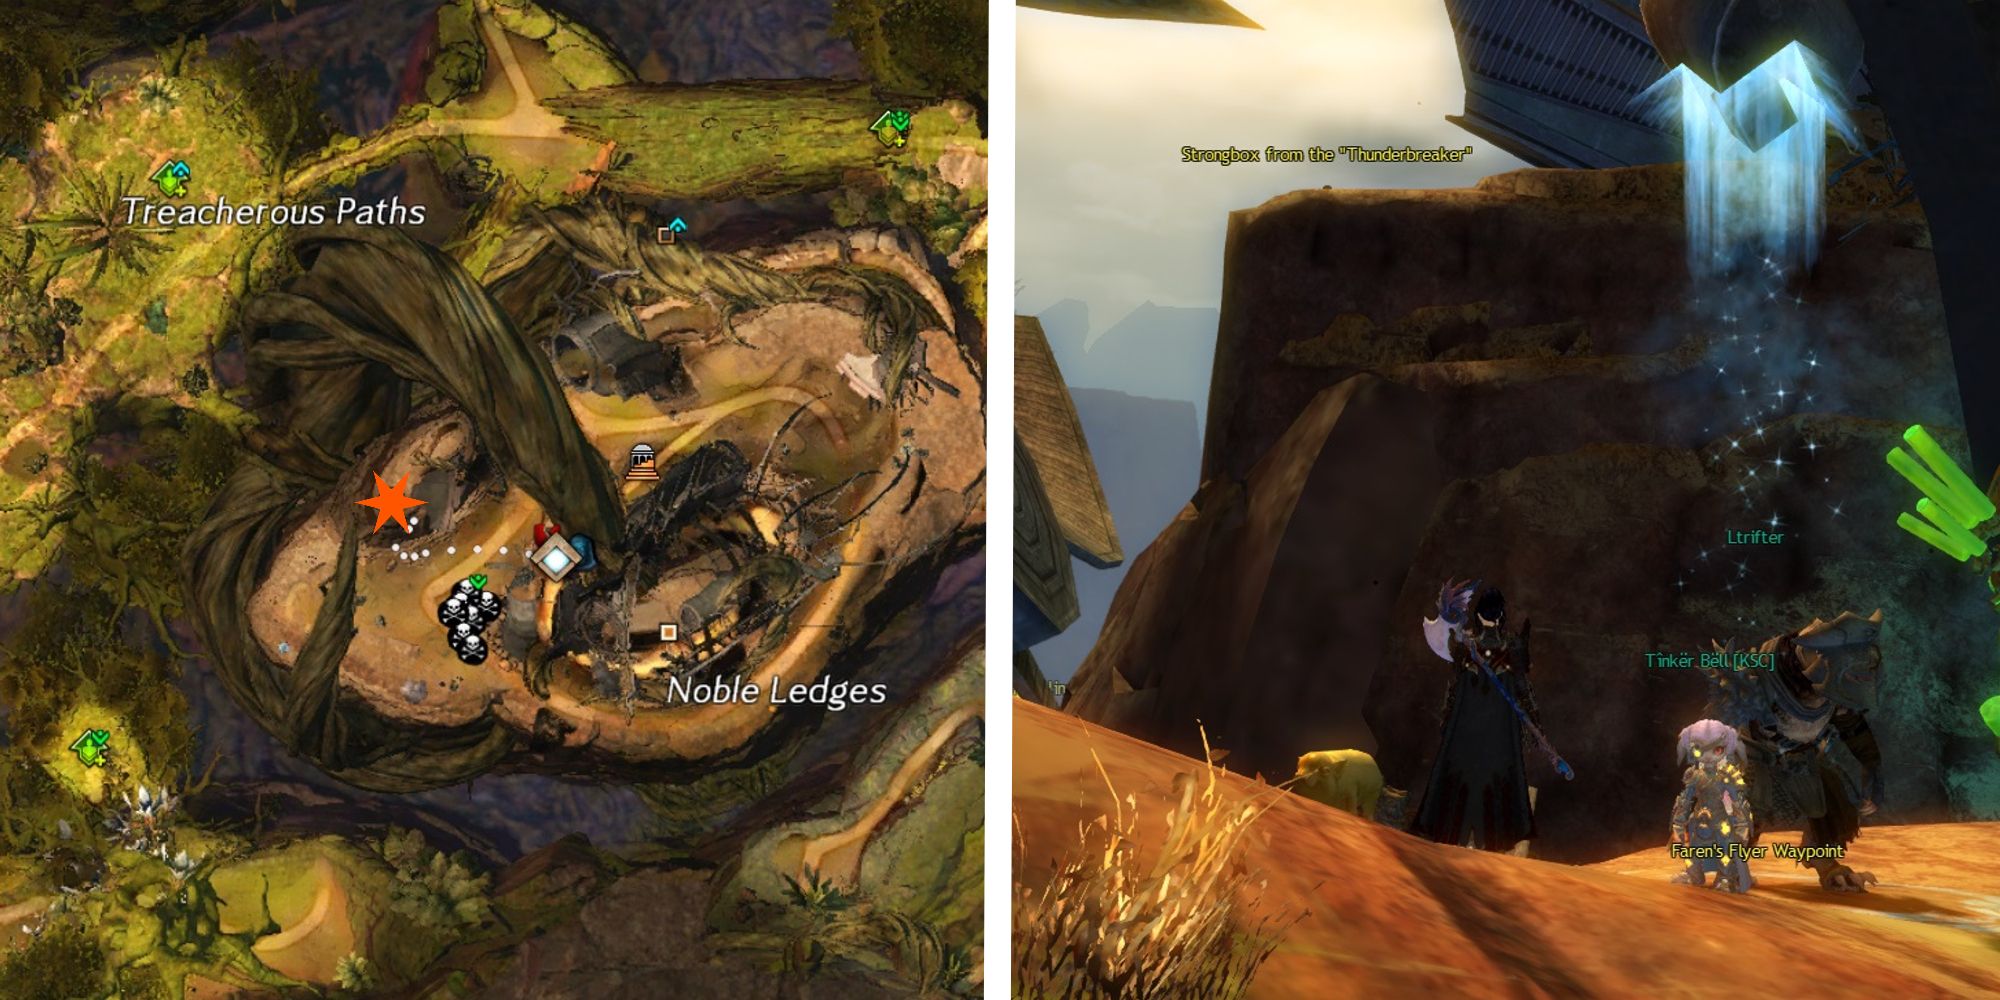 thunderberaker strongbox location on map, next to image of box from waypoint